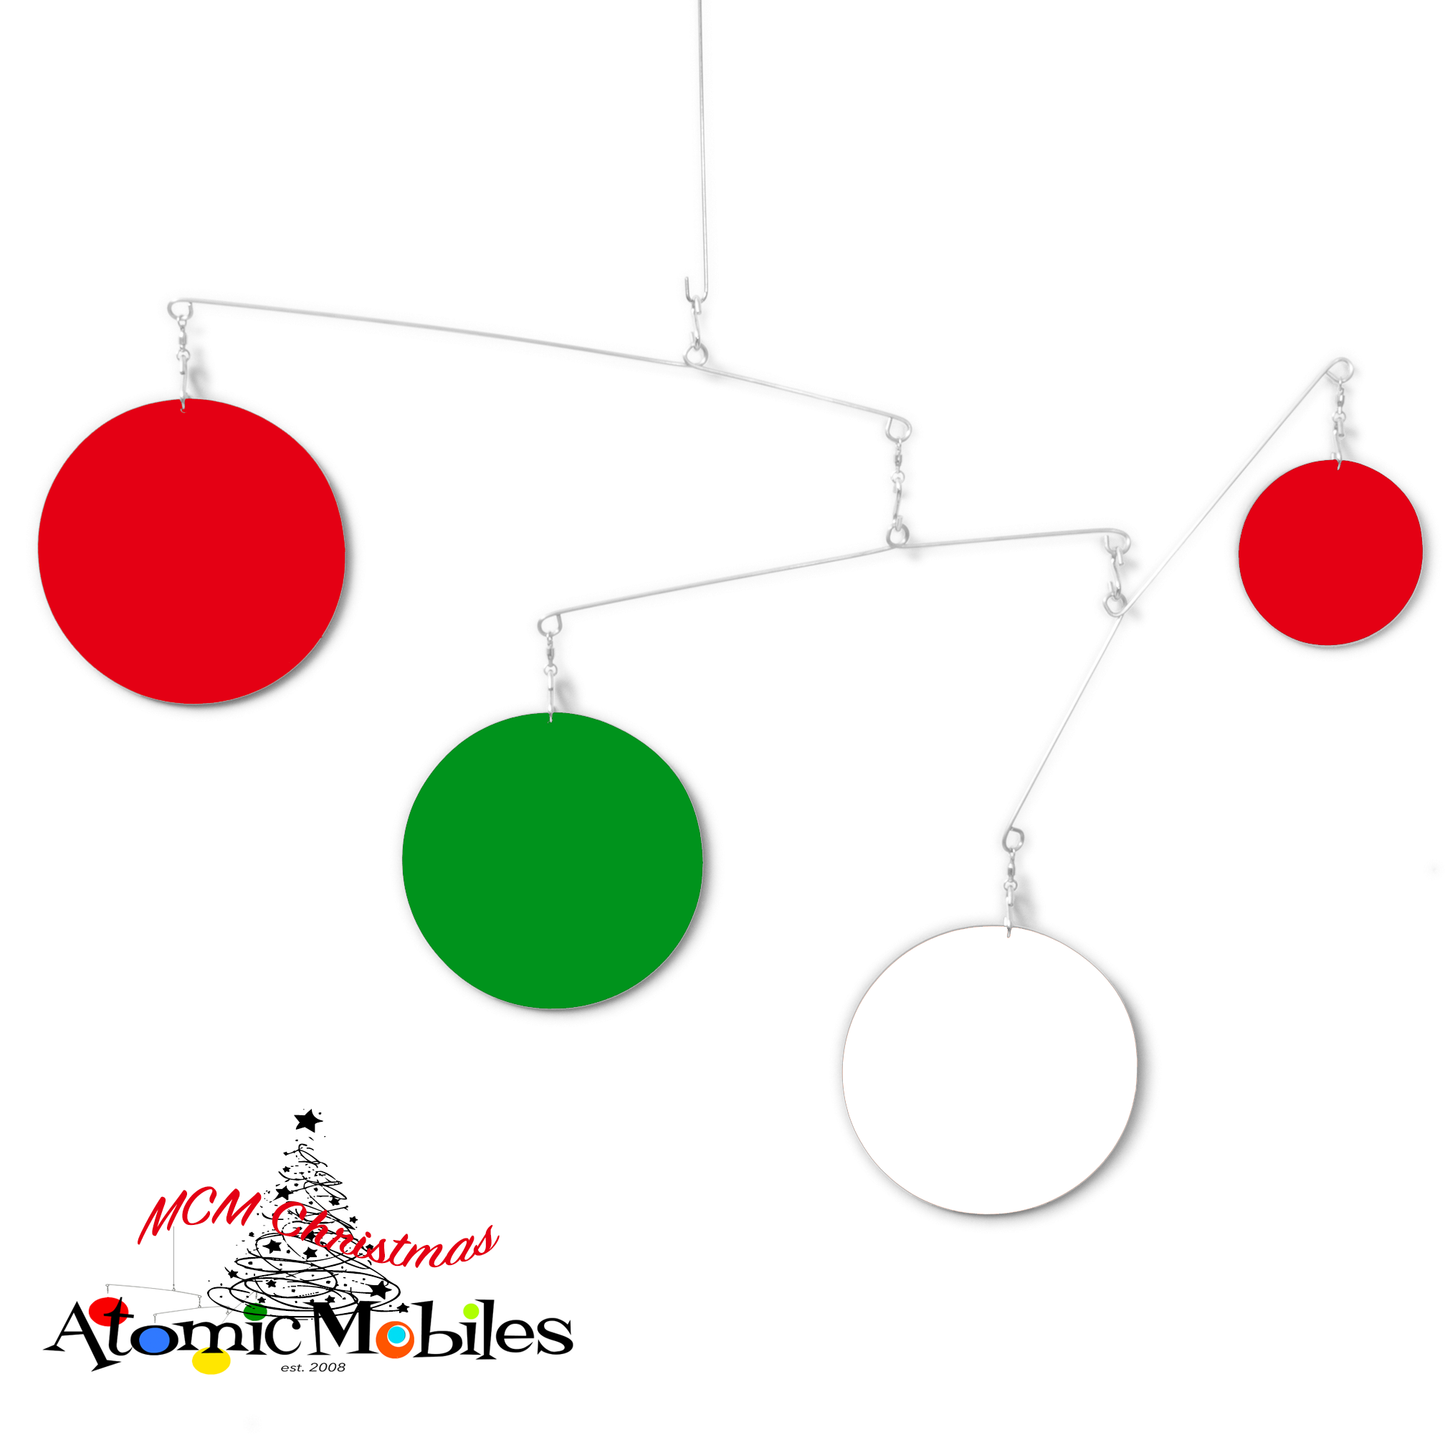 Unique Christmas Decoration - kinetic hanging art mobile in Christmas colors of Red, Green, and White by AtomicMobiles.com